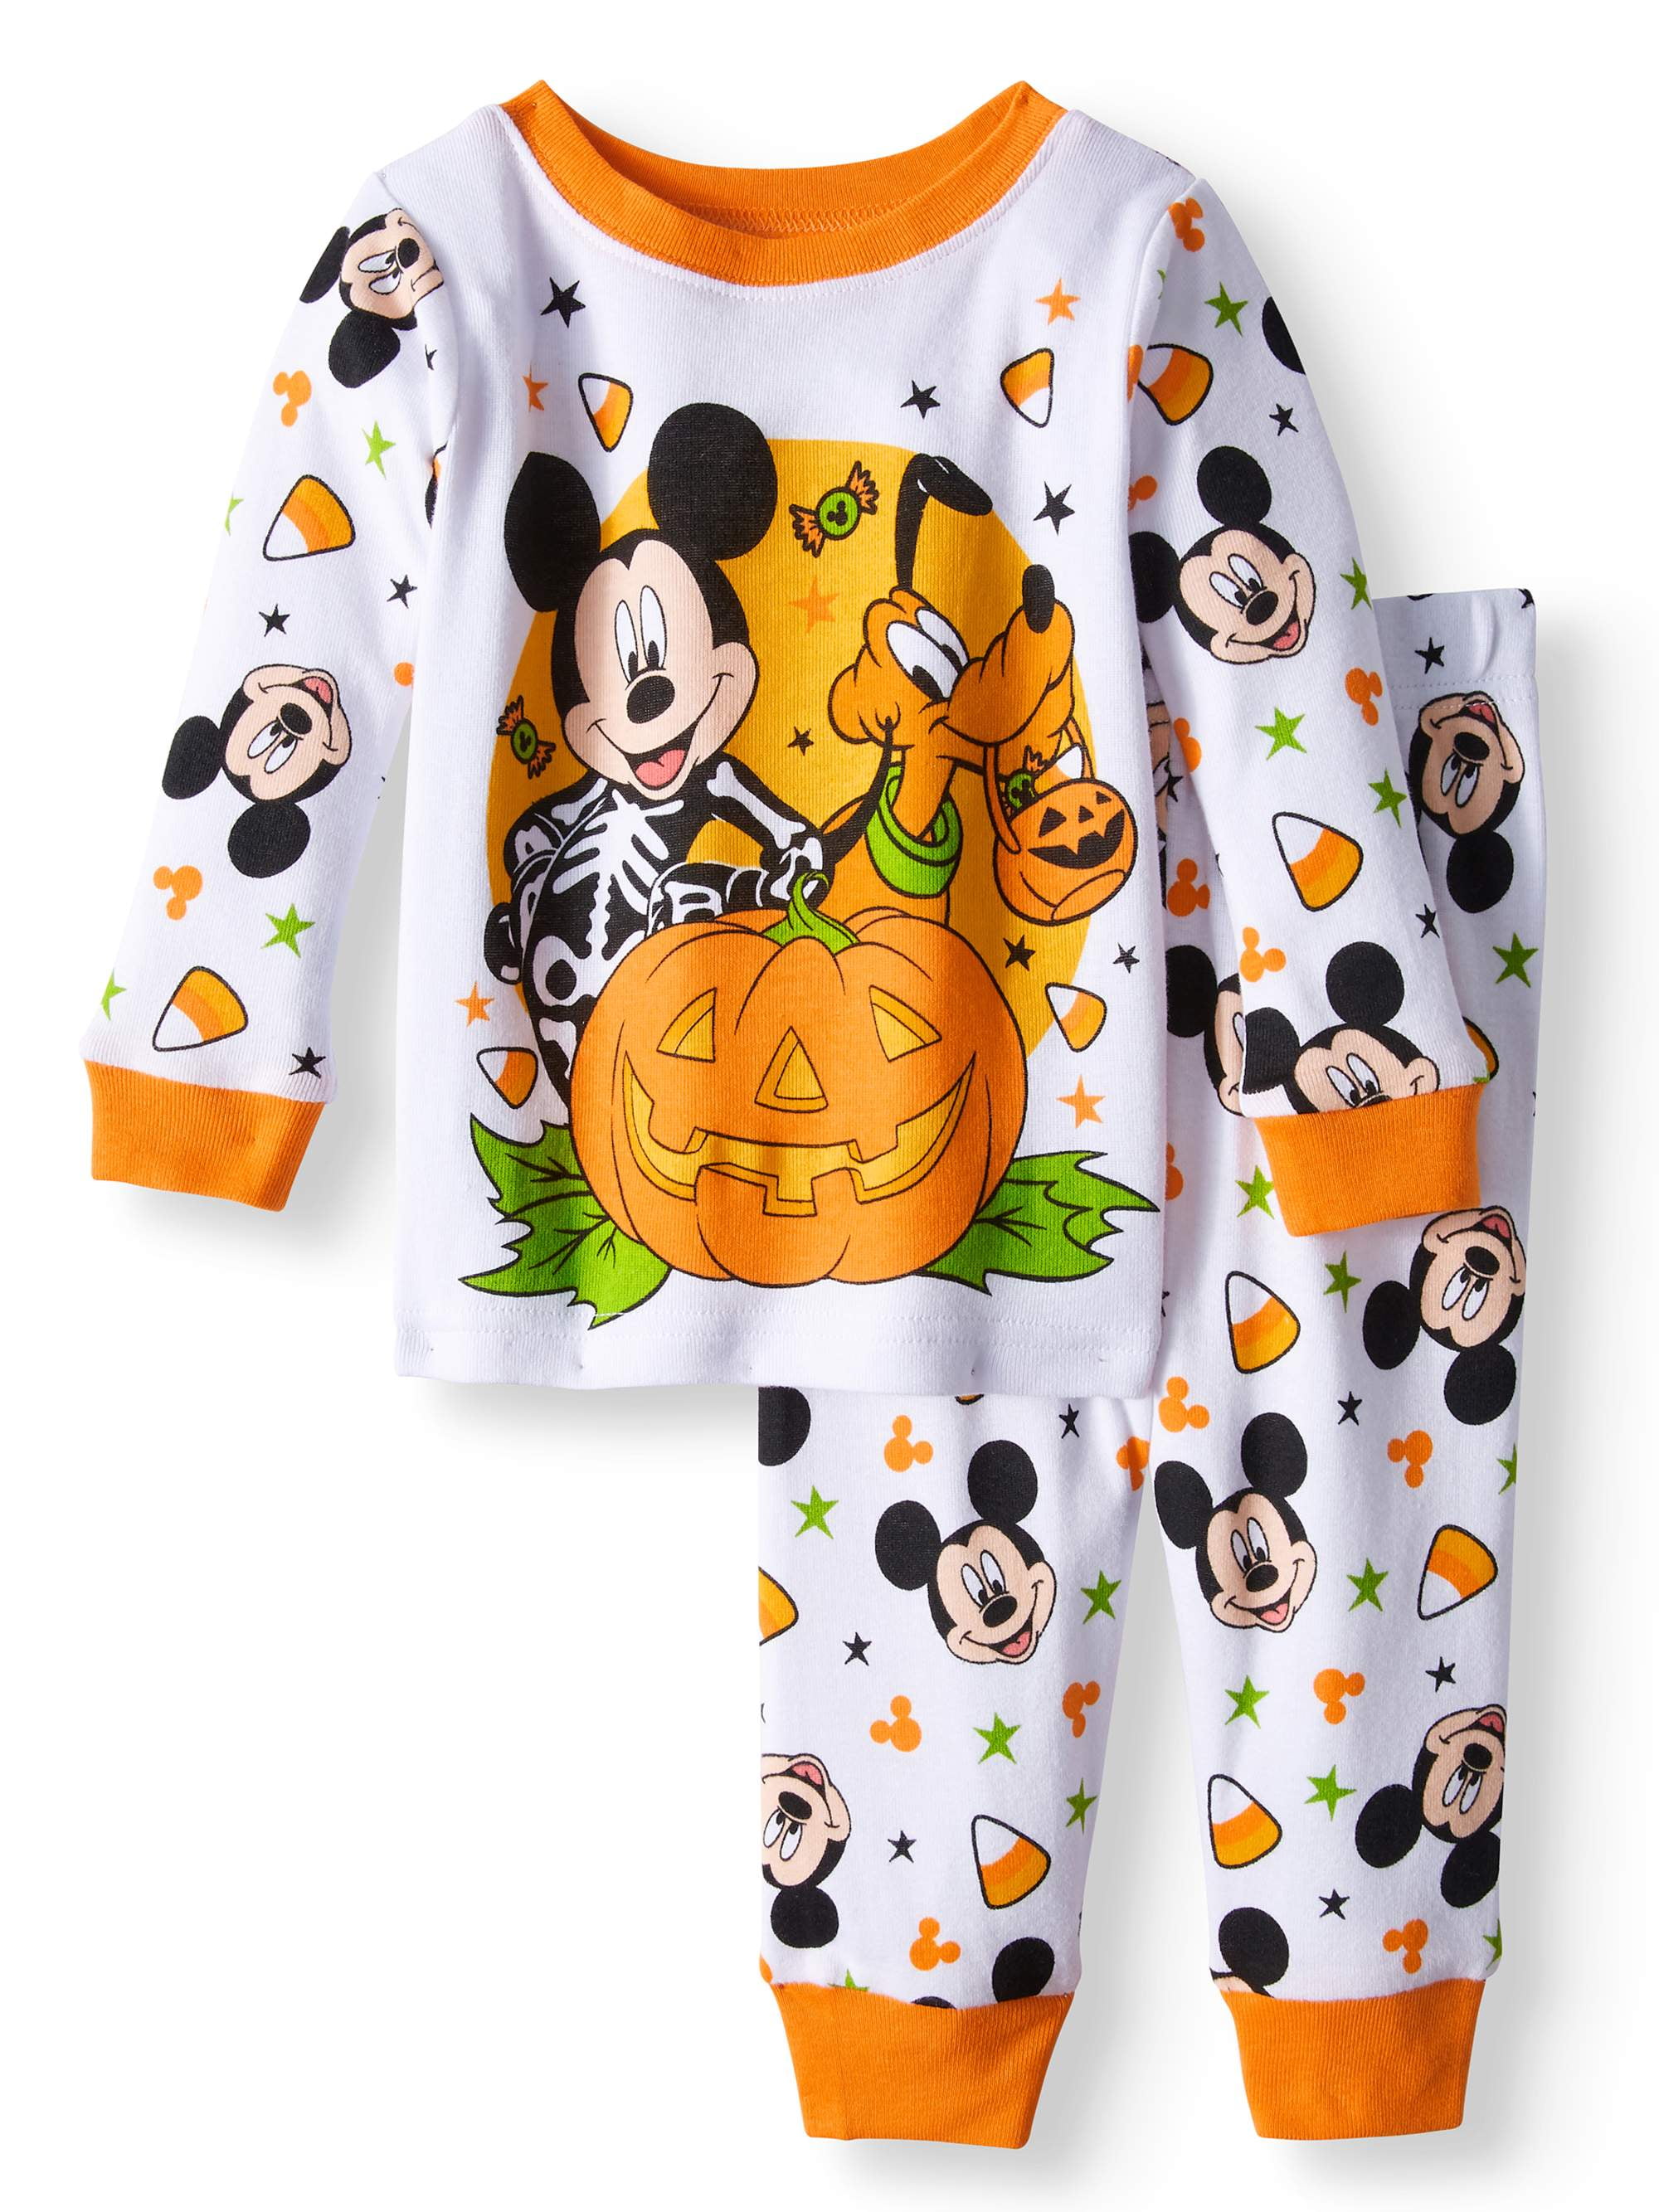 Details about   Disney Mickey Mouse Sorcerer Infant Halloween Pajamas Size 18 months NWTs 